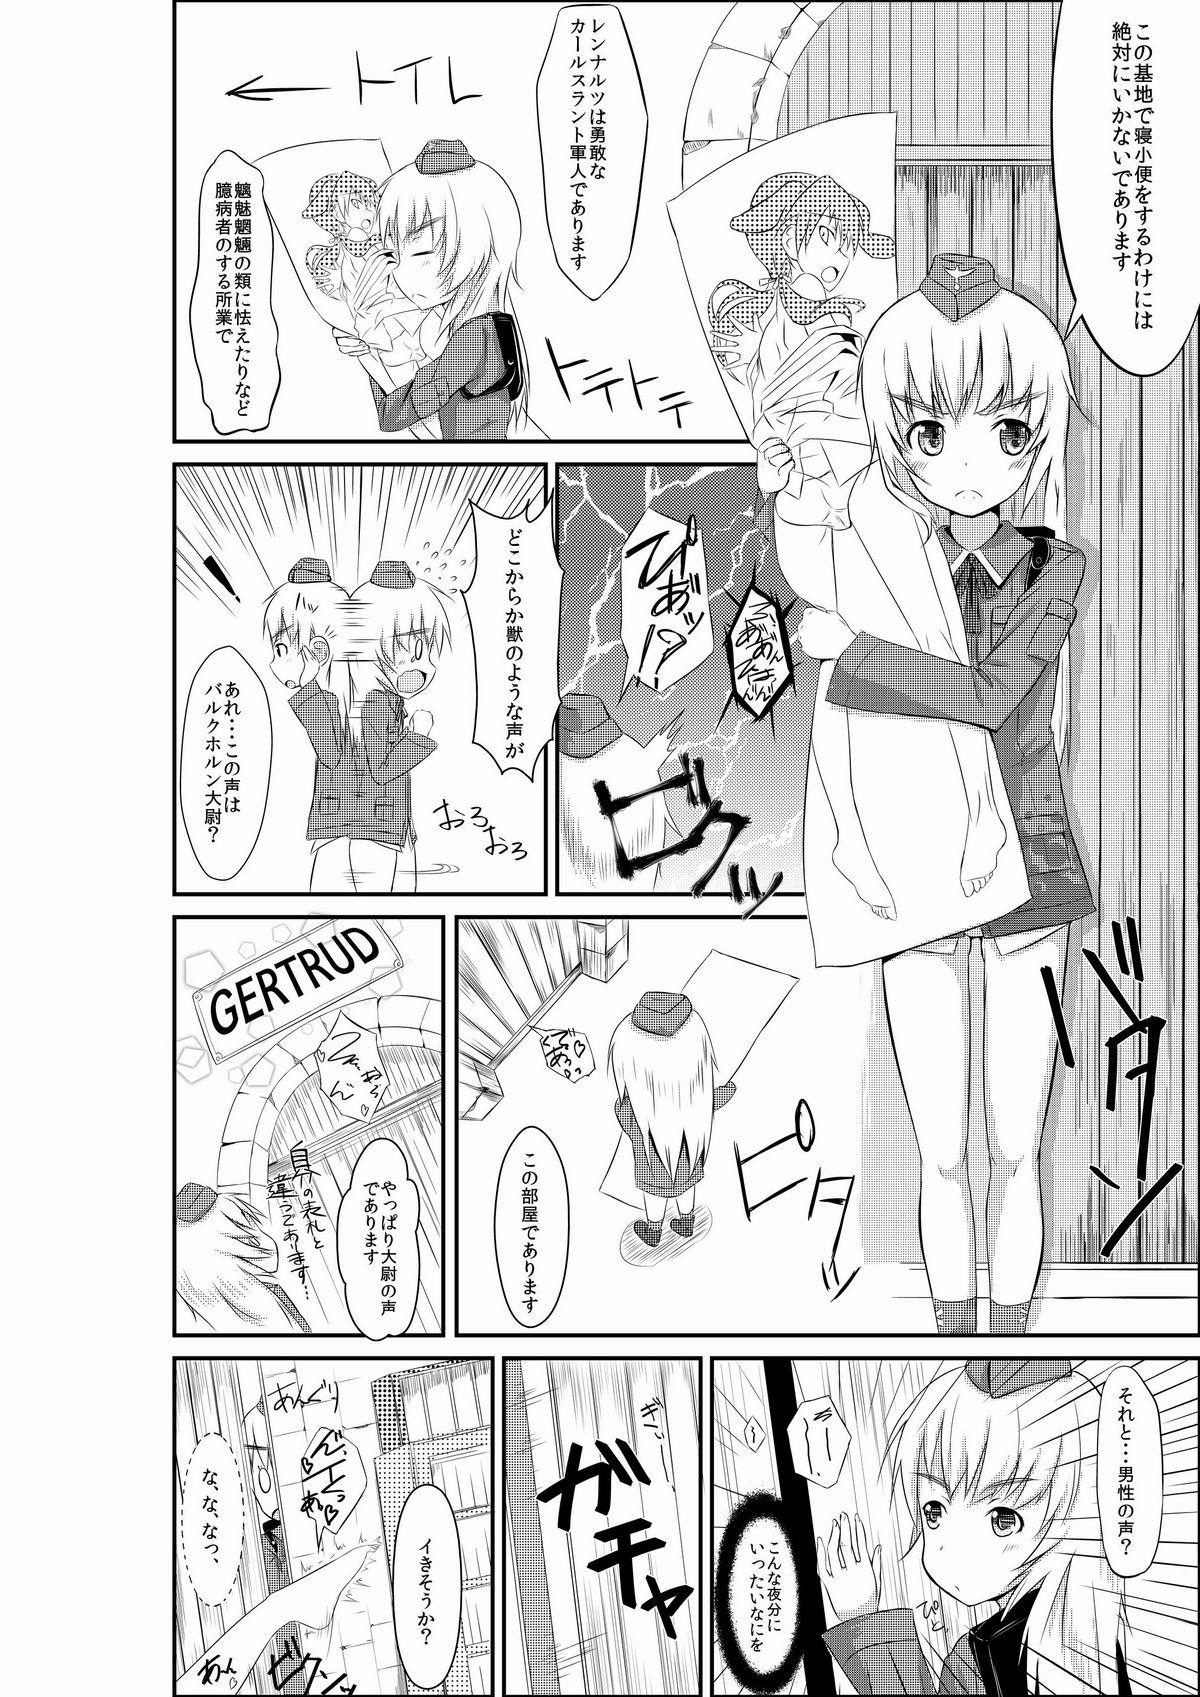 Teen Blowjob 練習 お姉ちゃんとヘルマちゃん - Strike witches Facial - Page 2